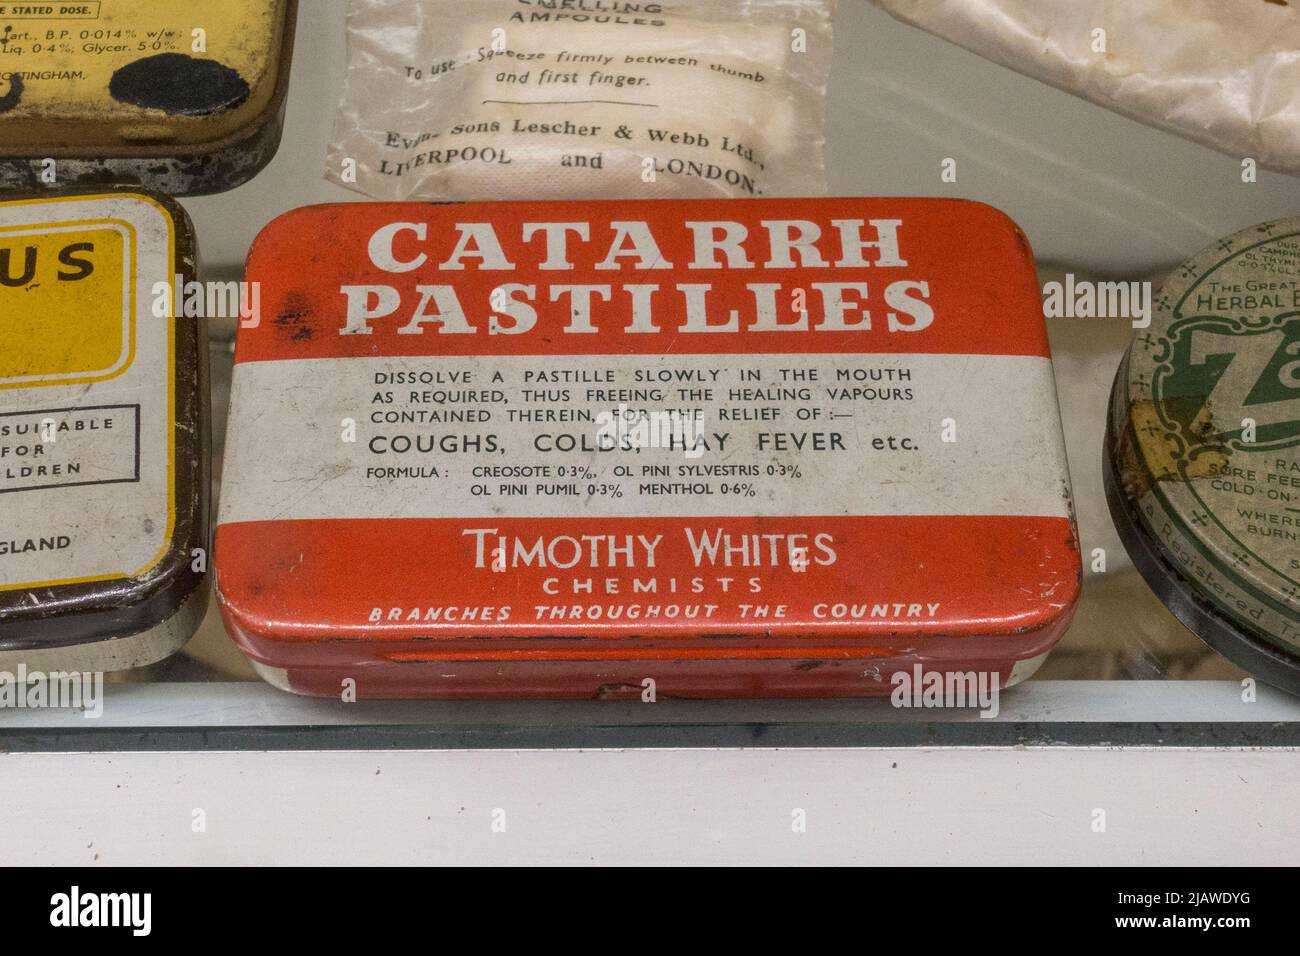 A tin of catarrh pastilles (Timothey Whites Chemists) in Eden Camp Modern History Theme Museum near Malton, North Yorkshire, England. Stock Photo